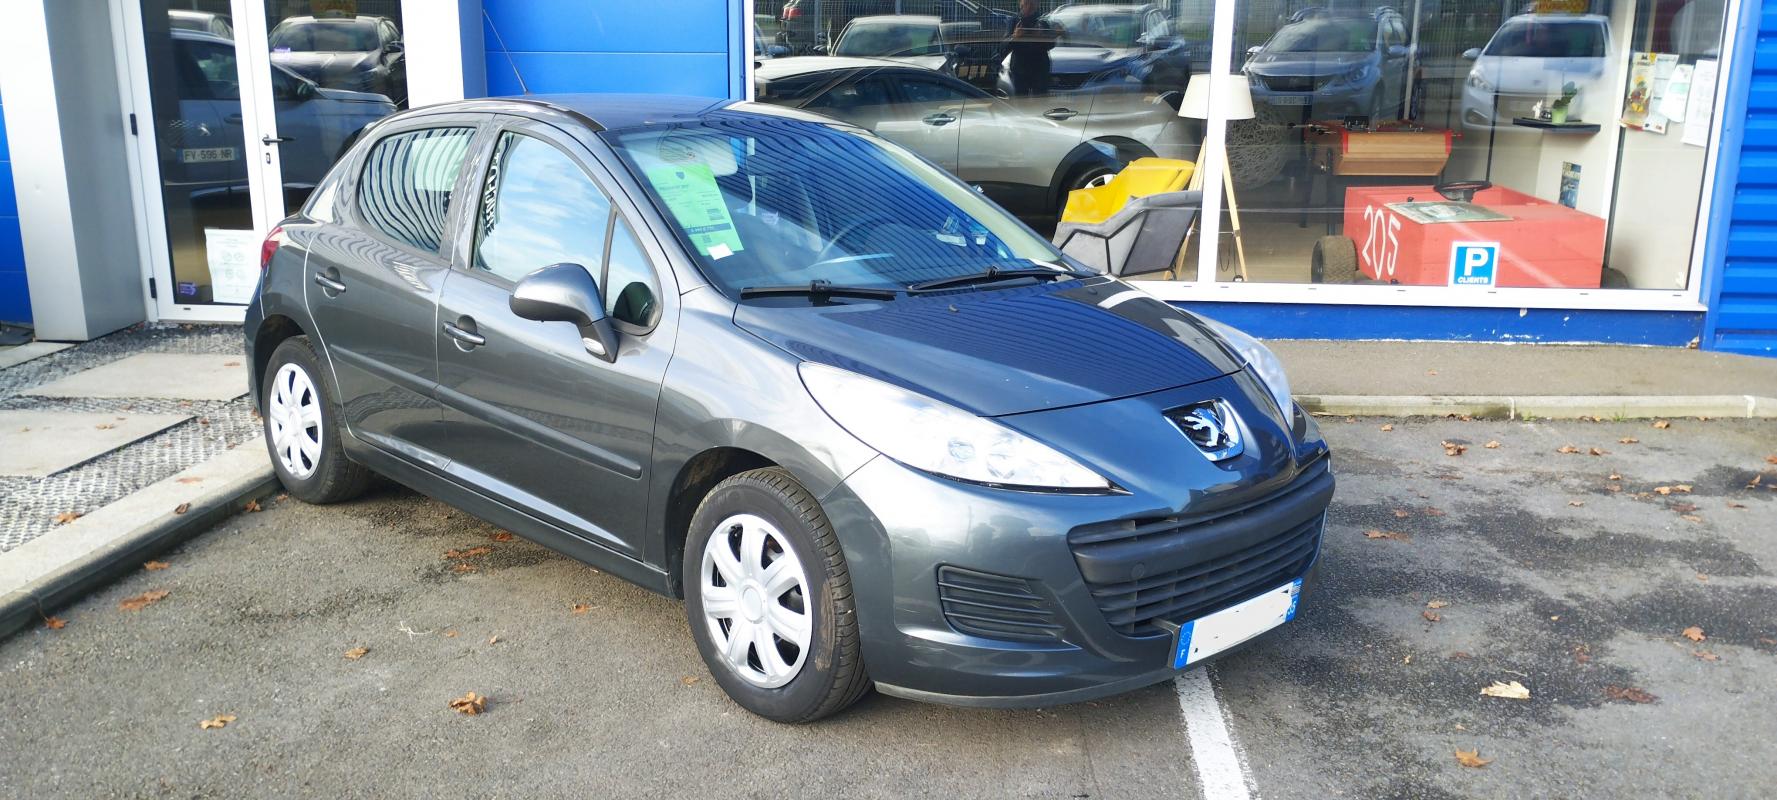 PEUGEOT 207 - 1.4 HDI ACTIVE TRENDY BVM5 (2010)